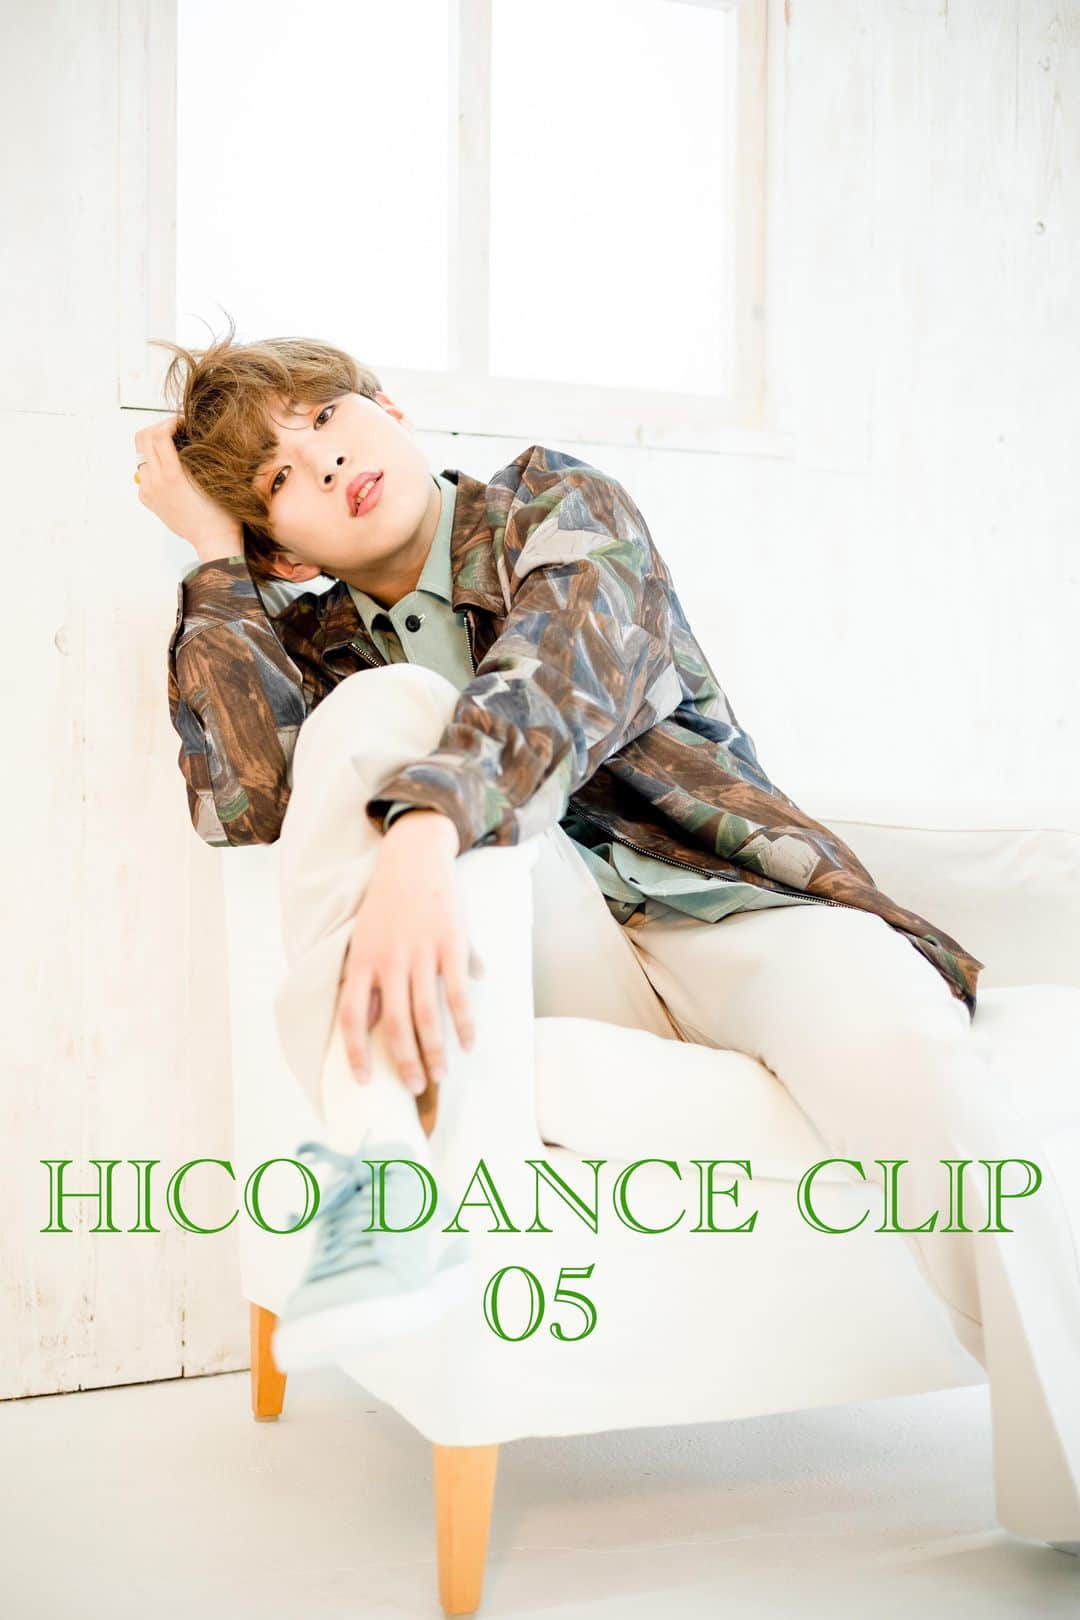 HICOのインスタグラム：「HICO DANCE CLIP 05公開！  Performed ＆ Choreographed by HICO  HICOLAND OFFICIAL  WEBSITE https://hicoland.com  Instagram：https://www.instagram.com/hico_land0707 Twitter：https://twitter.com/hico_land0707 TikTok：https://vt.tiktok.com/ZSJQoBQmS/  HICO初のステージがなんばHatchで開催決定！ 【公演概要】 「Puzzle Piece 1 ～Piece of a Dream～」 開催日：2021年11月13日（土） 会場：なんばHatch（大阪） 開場：17:30／開演：18:00 チケット代：全席指定　¥6,600（税込） ドリンク代：入場時別途　¥600」